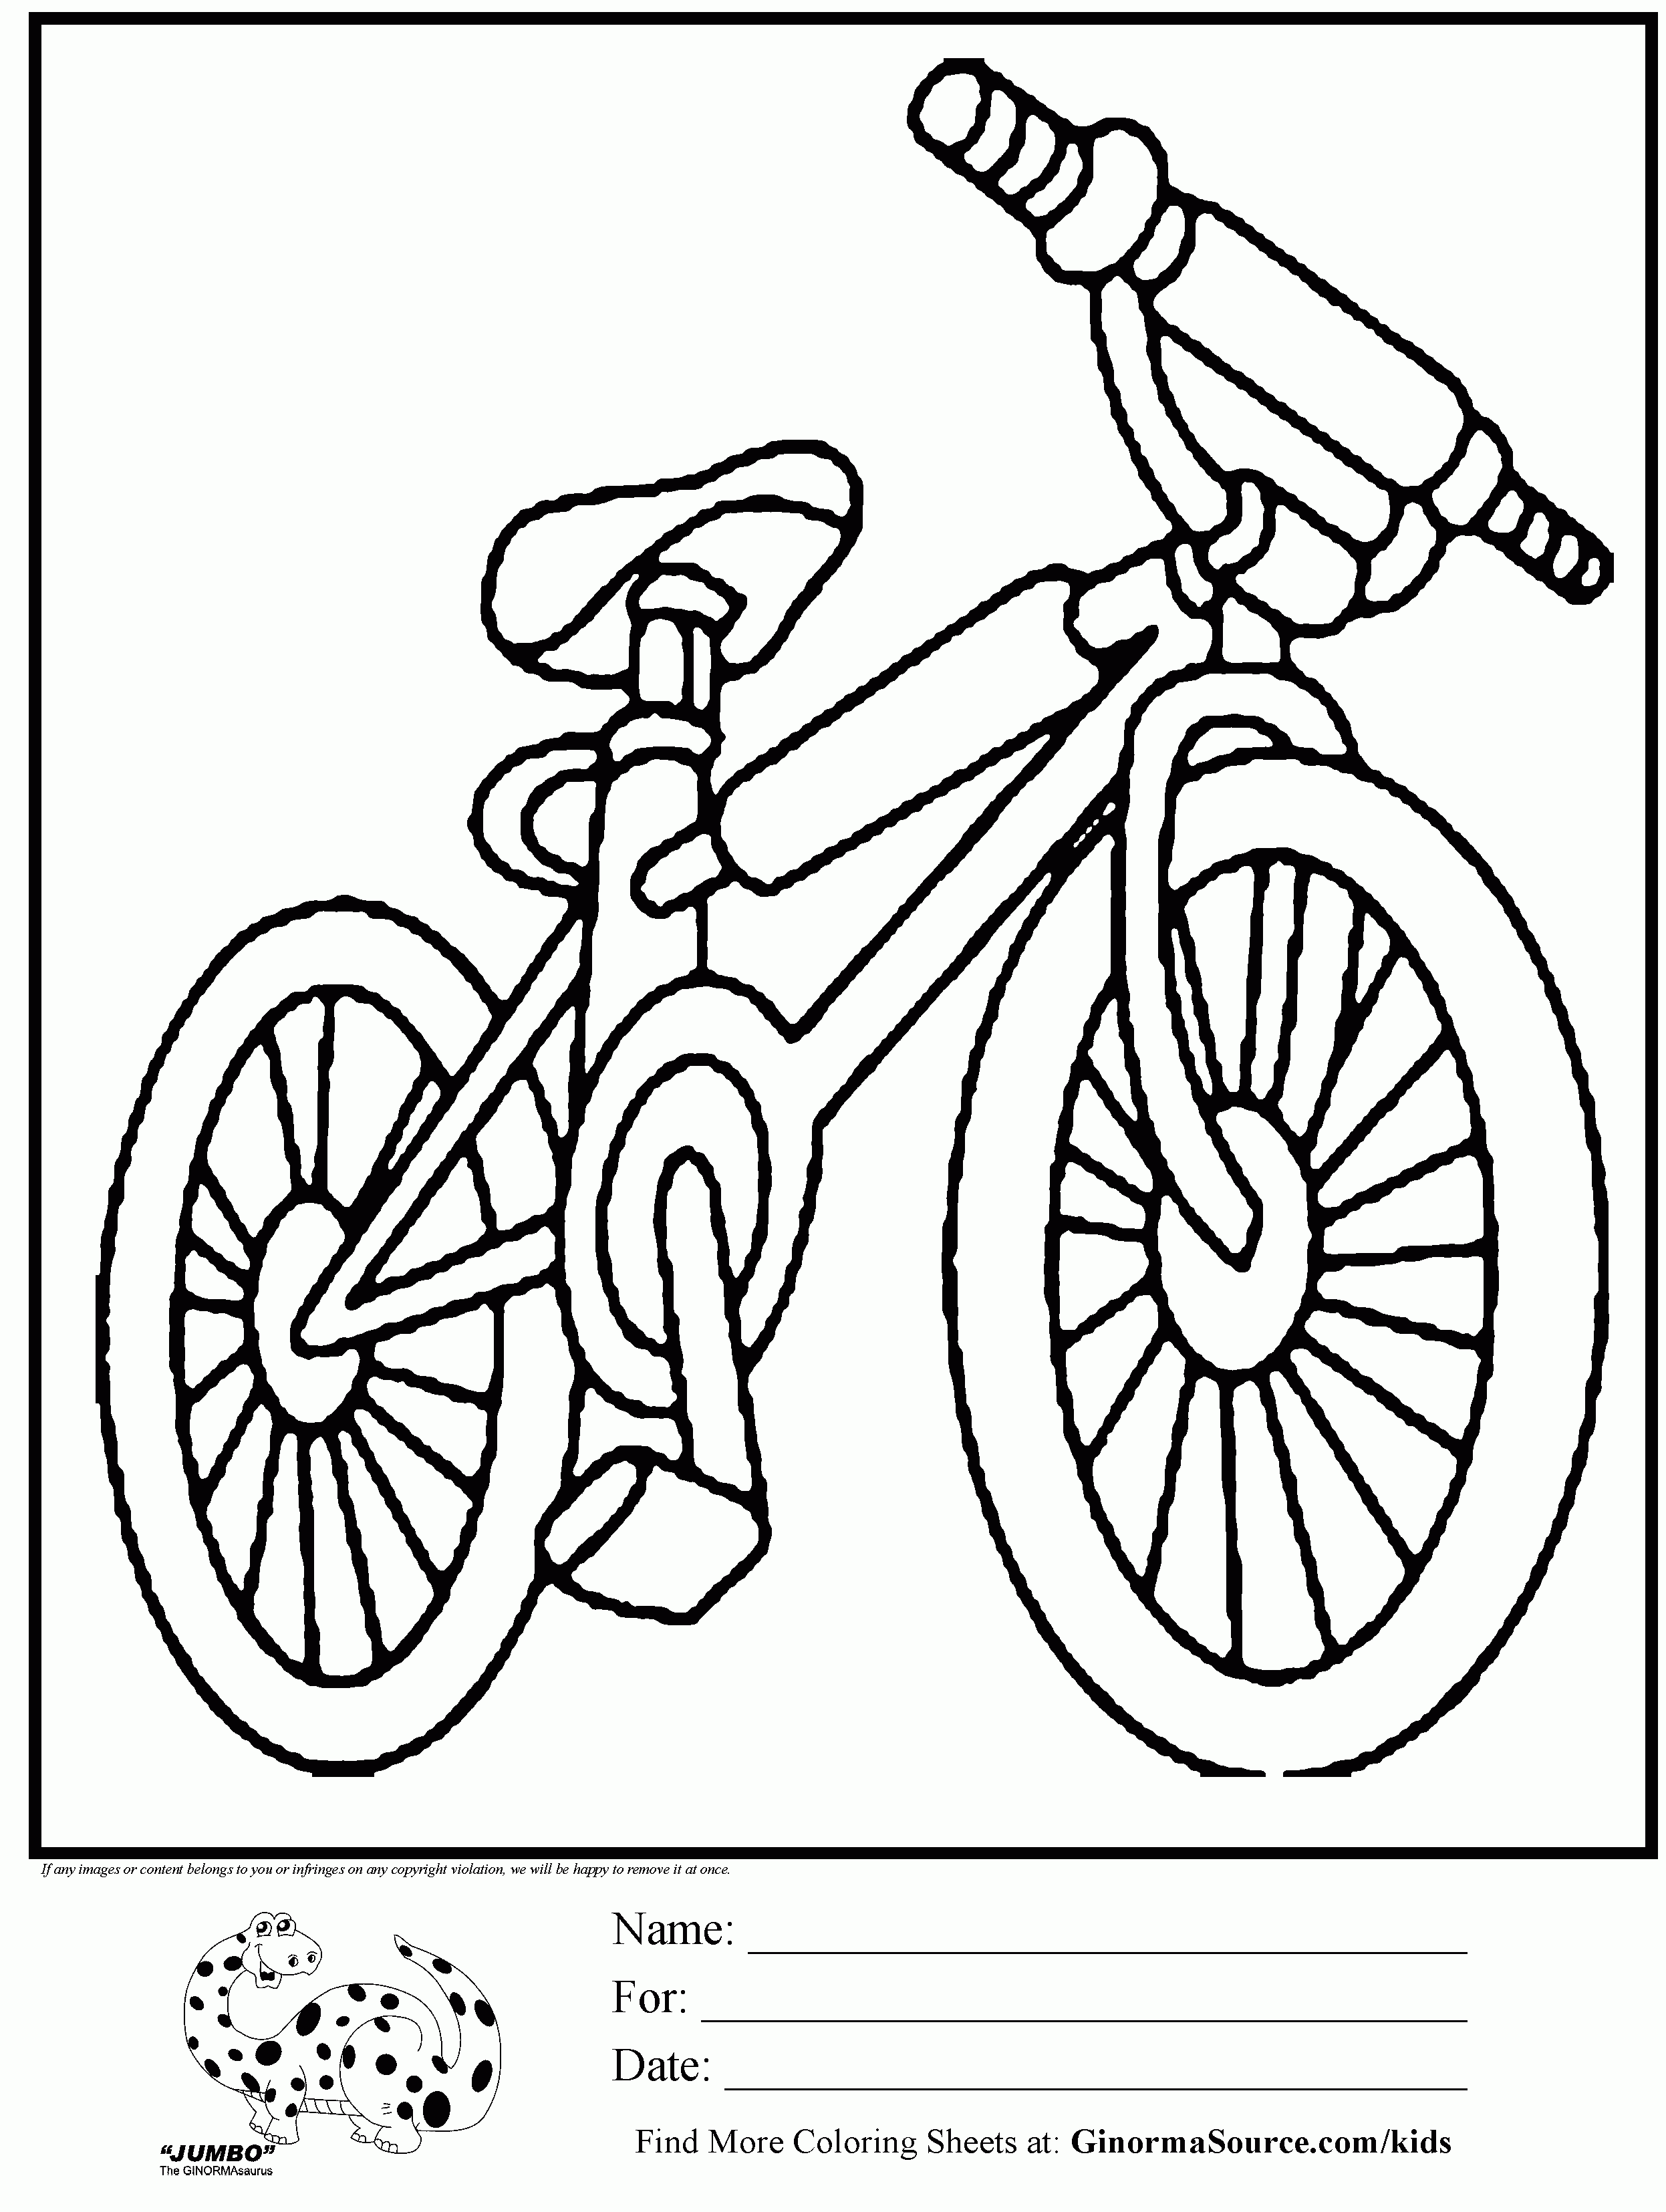 New Ride Bicycle Coloring Page Cool Coloring Page